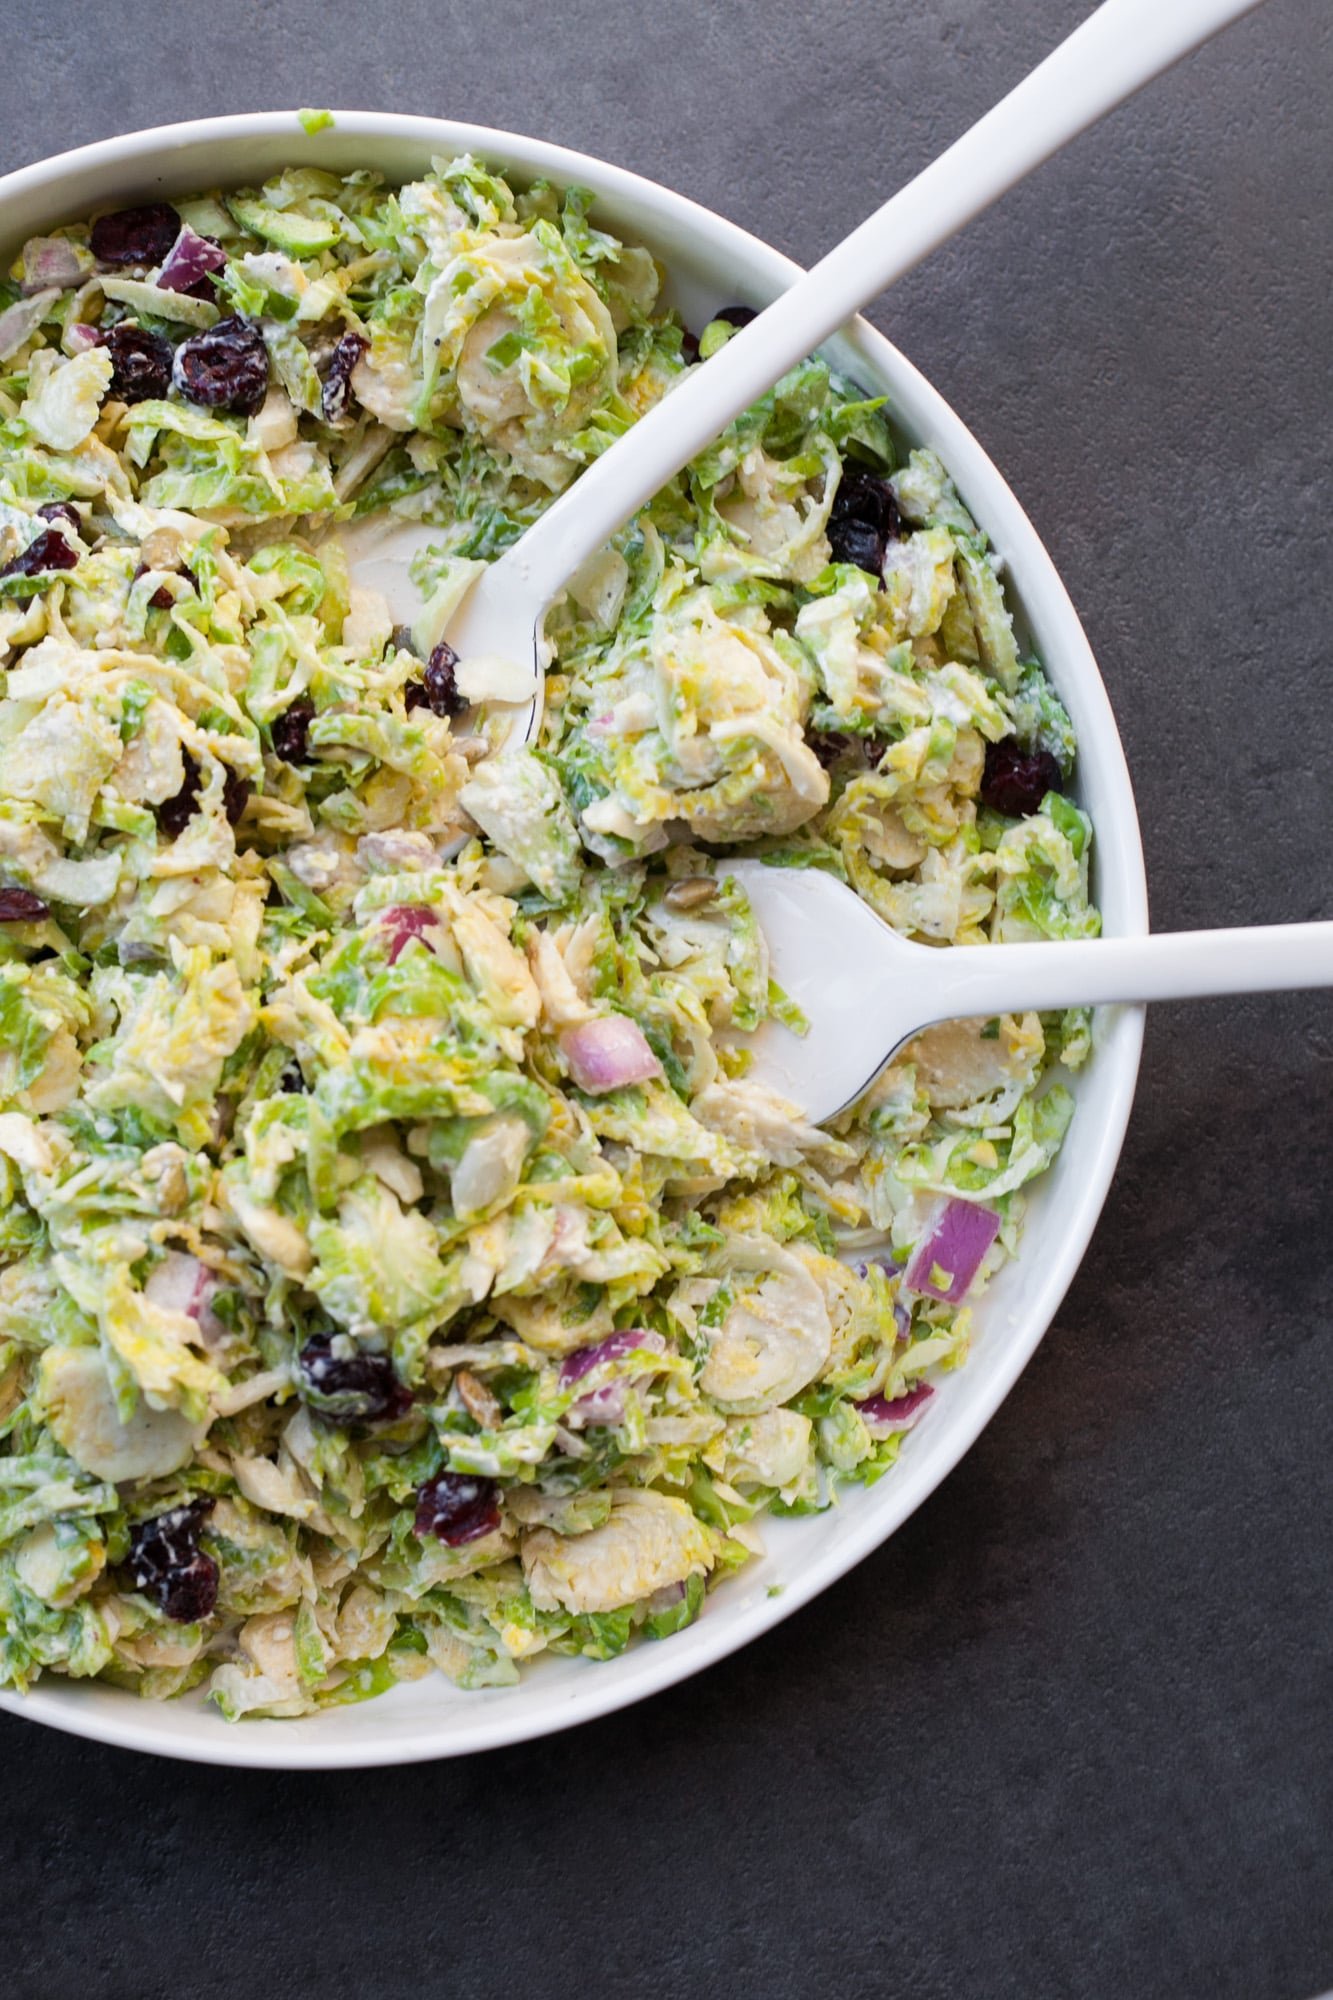 Creamy Brussels Sprouts Slaw in a shite bowl with a serving fork.